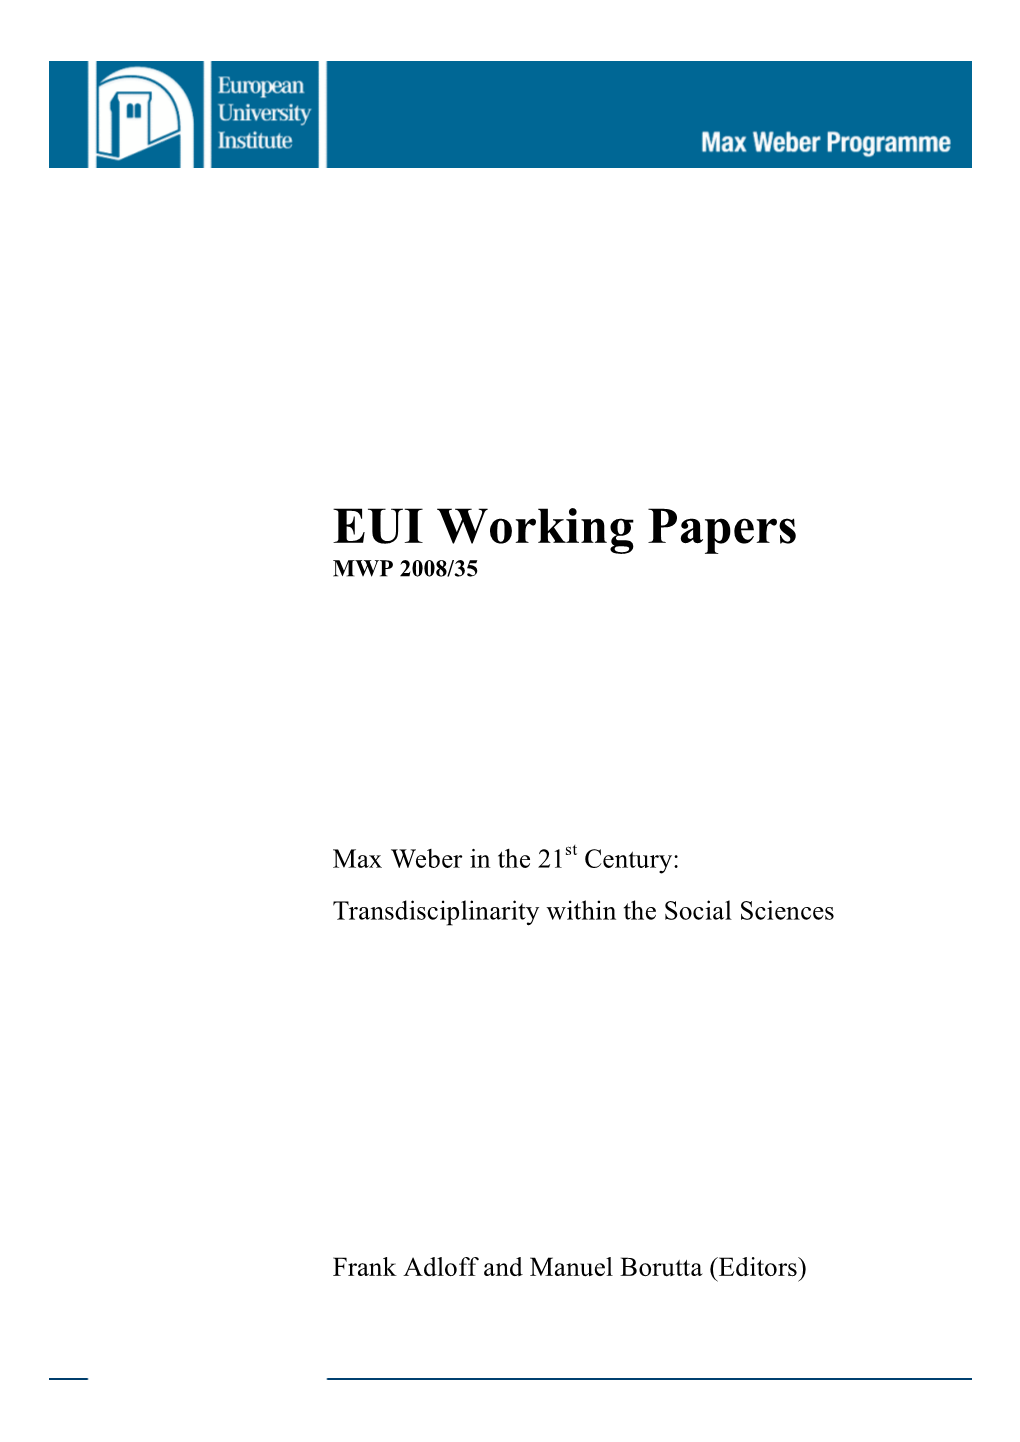 EUI Working Papers MWP 2008/35